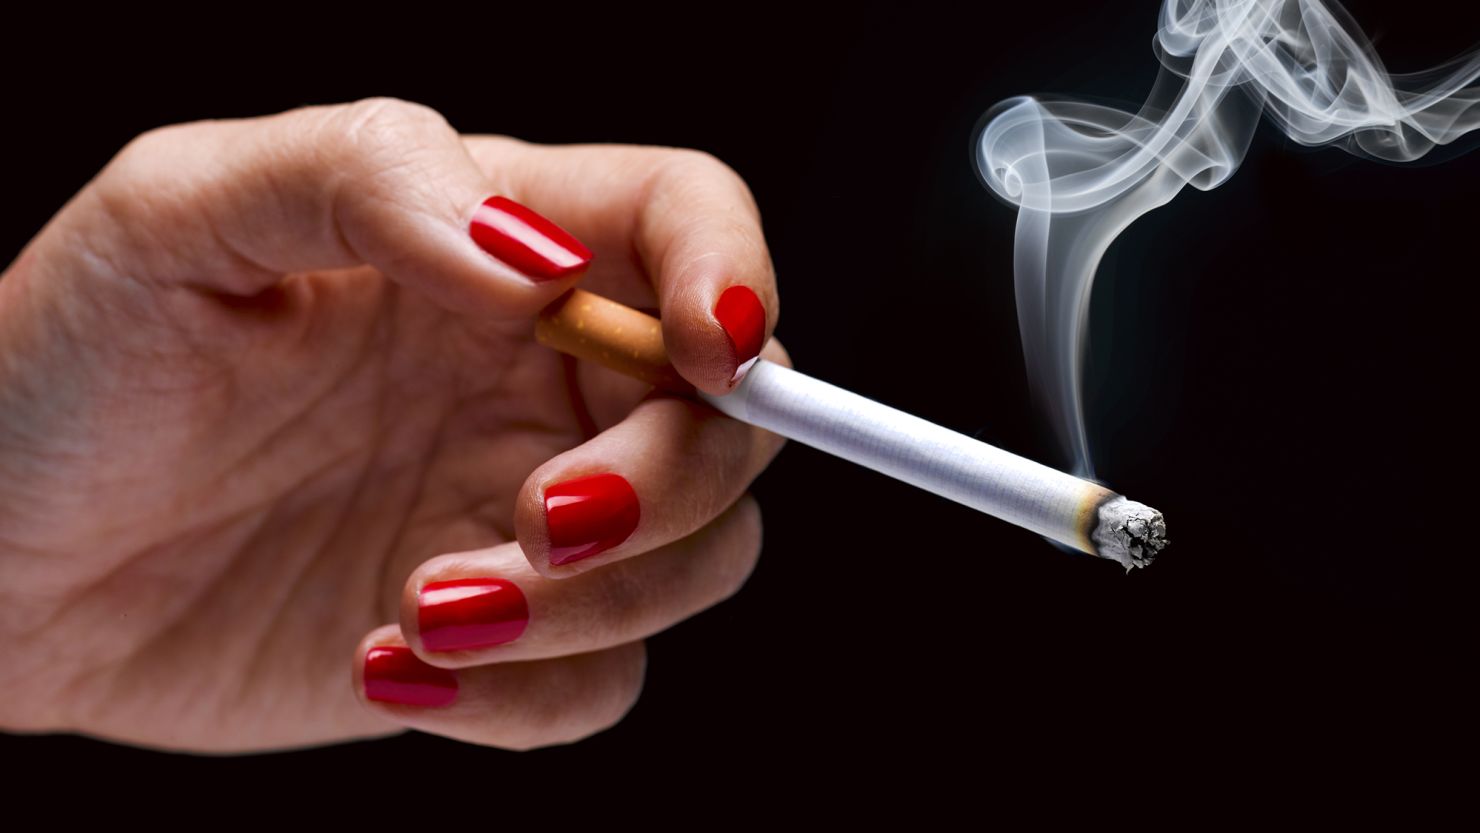 British MPs have backed a proposed bill banning anyone born on or after January 1, 2009, from buying tobacco. If successful, it would mean today's 15-year-olds will never legally be able to buy cigarettes.